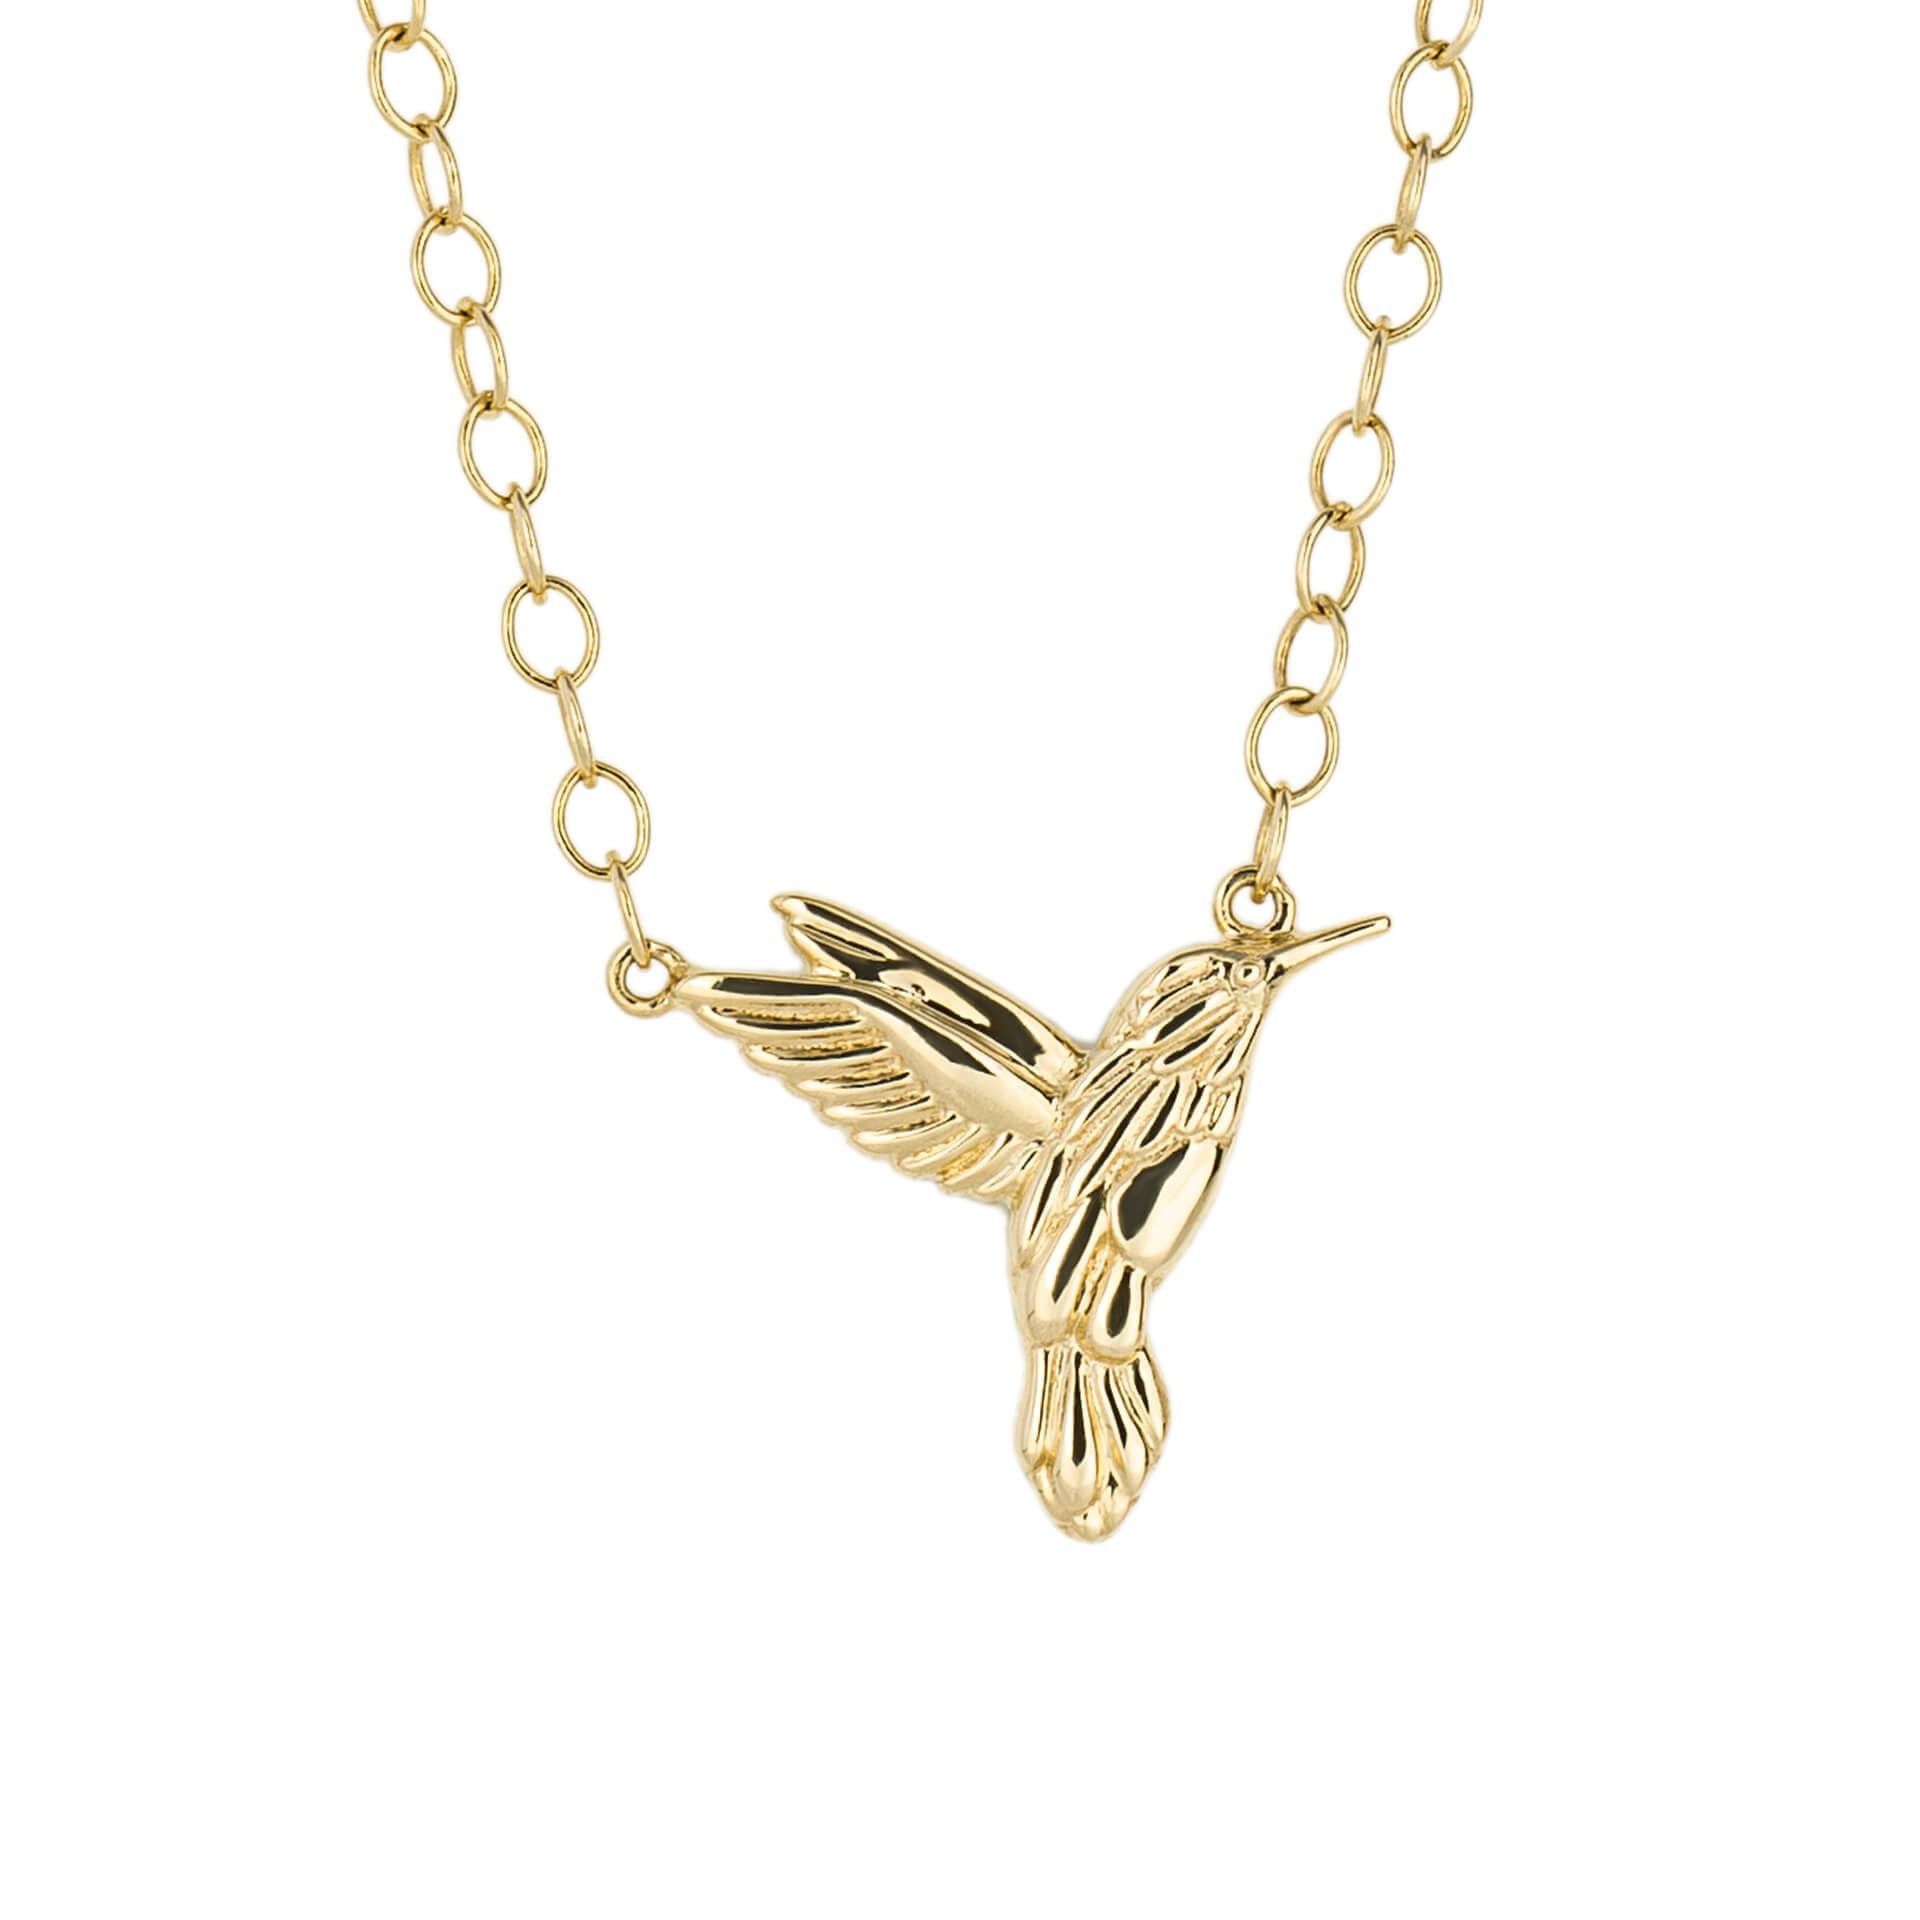 Hummingbird Motif Necklace in 9ct Yellow Gold